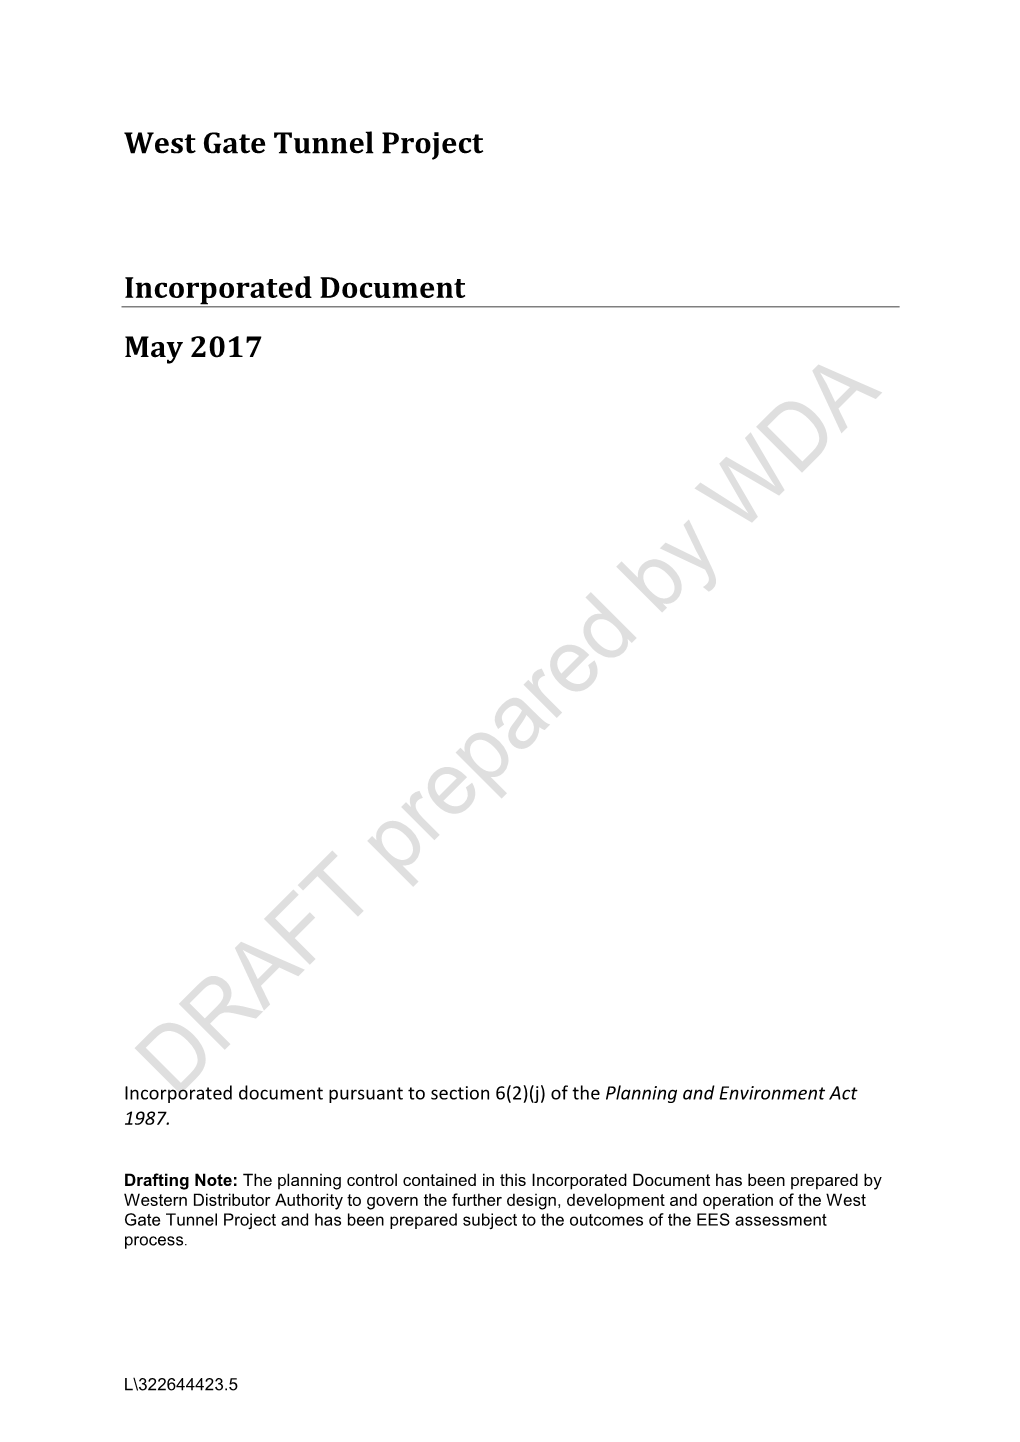 Incorporated Document May 2017